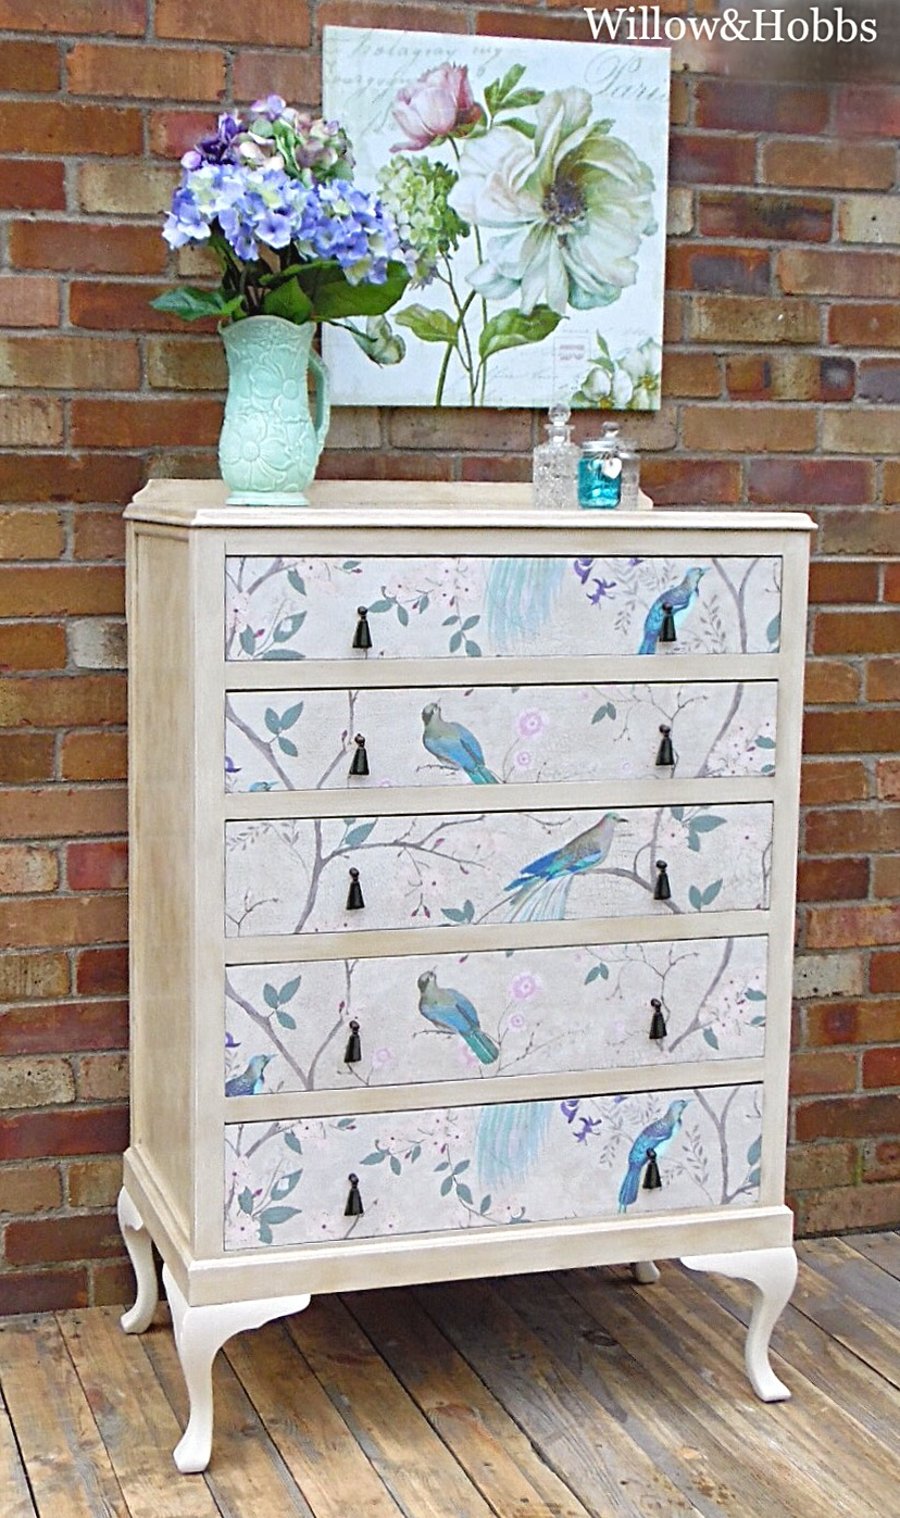 Now Sold - Vintage Queen Anne style Chest of Drawers, renovated, painted